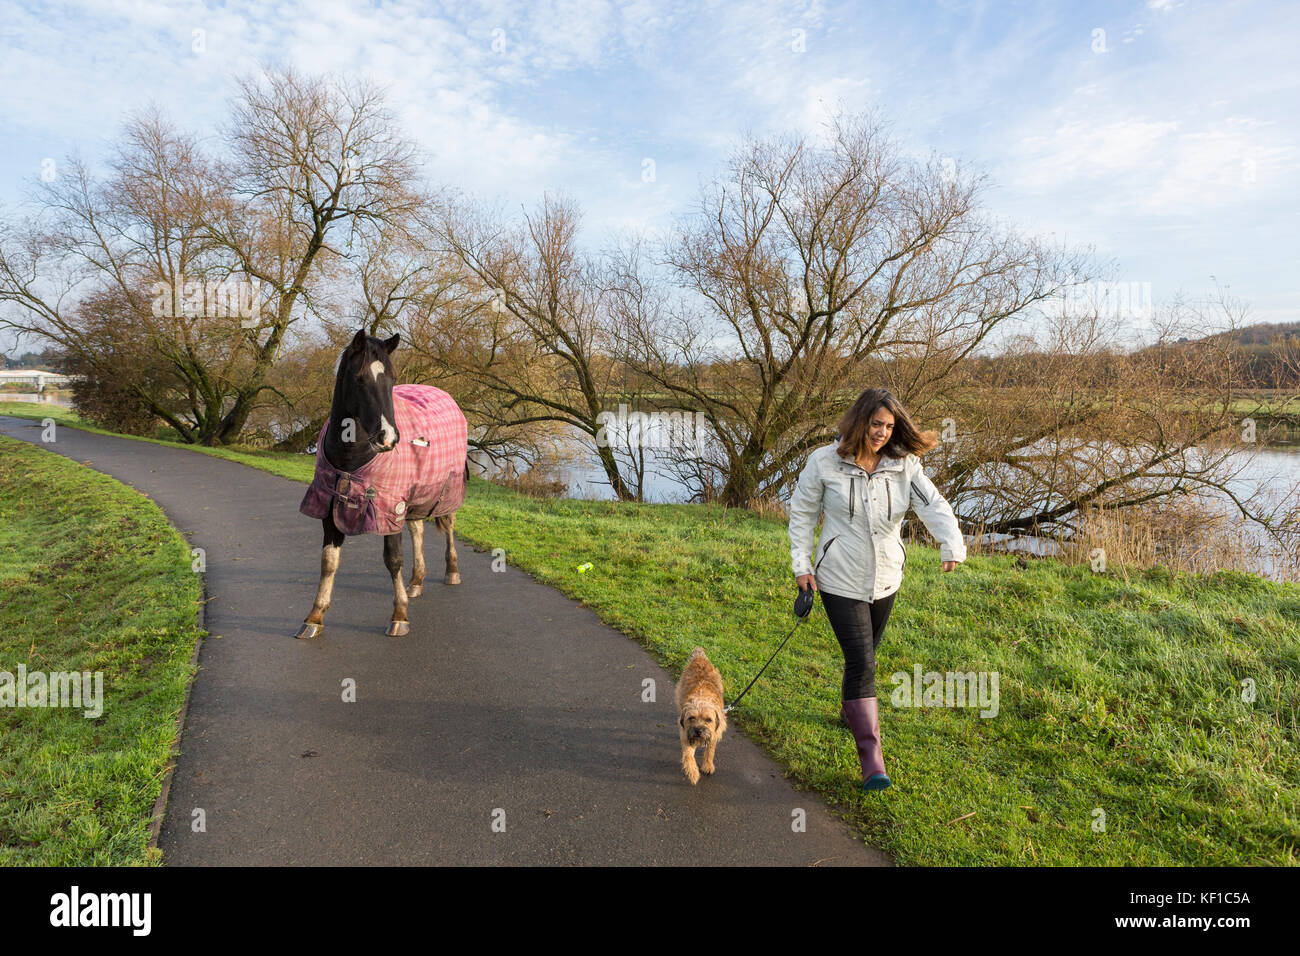 A horse obstructs the path as a woman walks her dog near the river Towy in Carmarthen Stock Photo